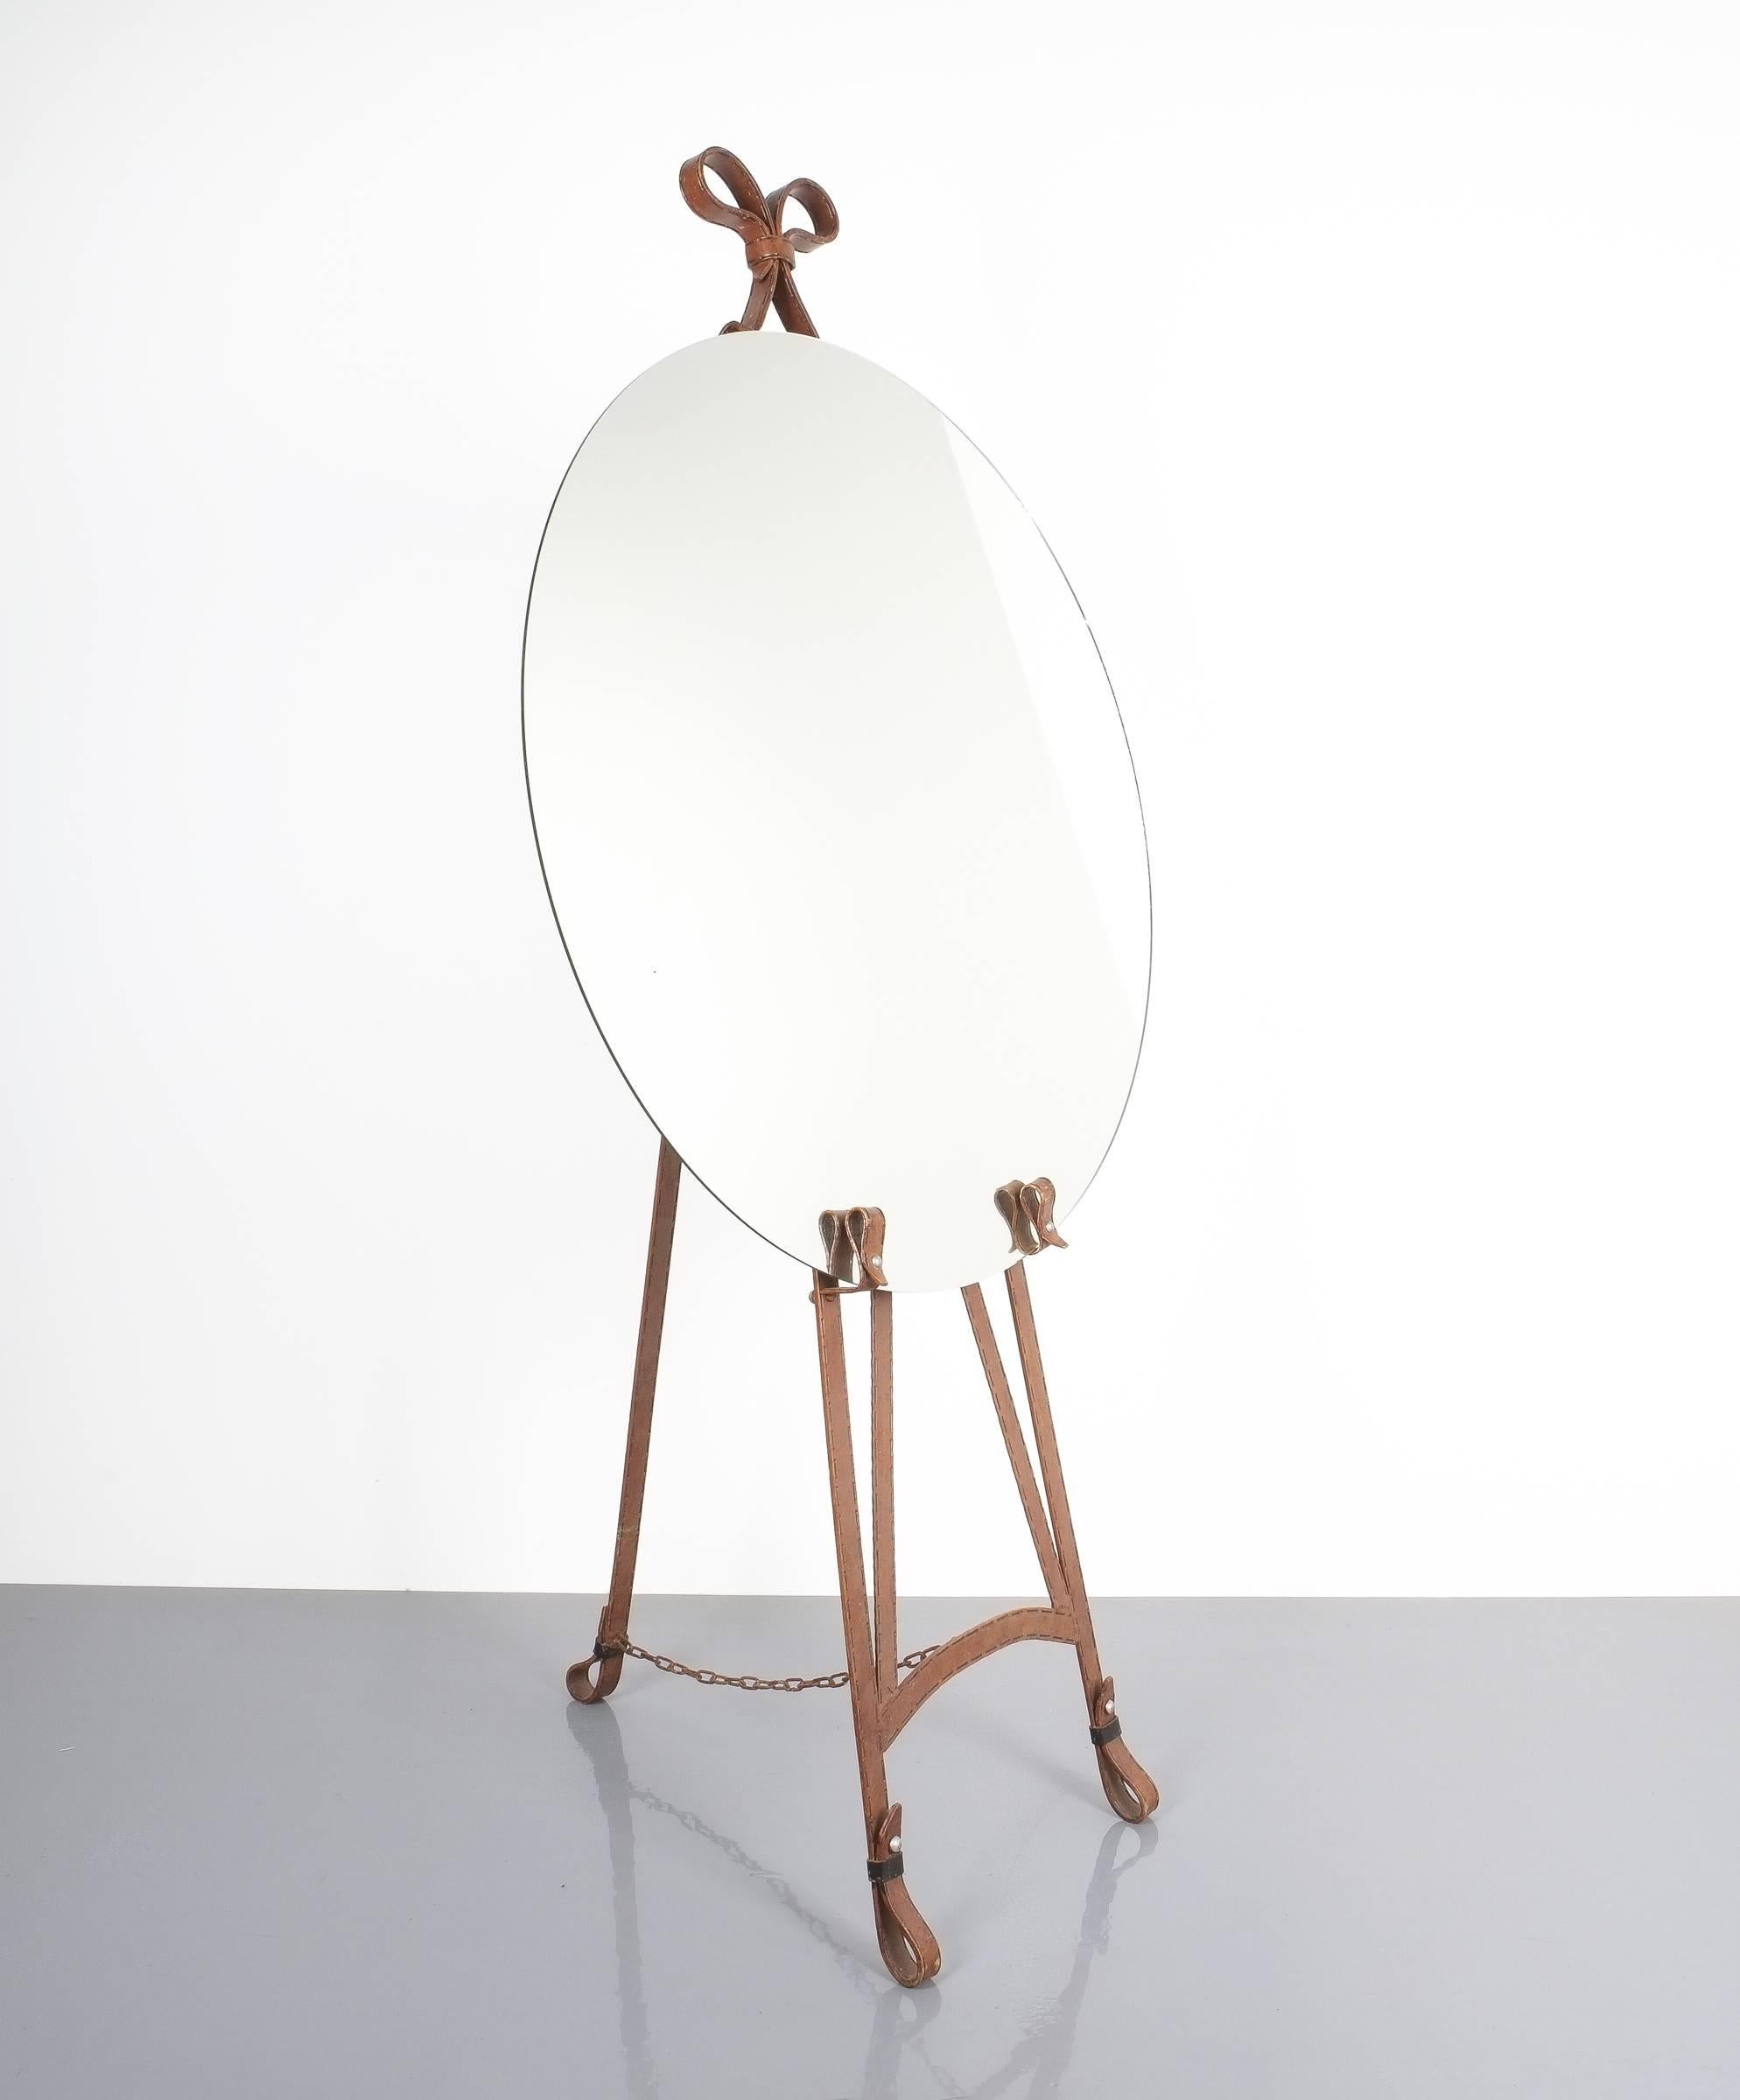 Rare Ferblanterie easel, unique piece

Faux leather wrought iron Easel, France, circa 1950. Very unusual easel made from lacquered iron that depicts a leather-like surface. The ring in the middle is made from aluminum. Measure: Height is 63.77“. It